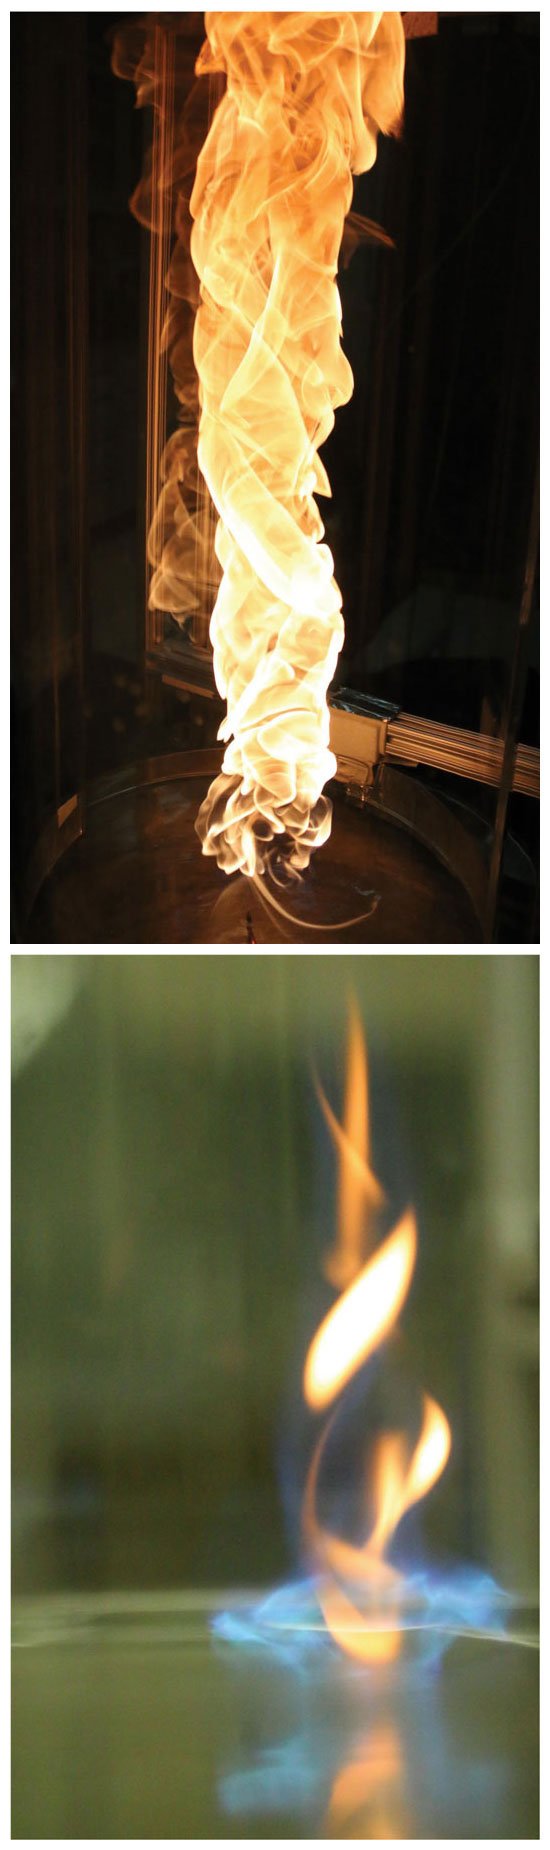 Fire whirls rarely occur in nature, but form readily in enclosed or semienclosed spaces. Yellow flame (<em>top</em>) signals the production of soot. So as a fire whirl, formed by injecting and igniting fuel over water, transitions to a blue whirl (<em>below and subsequent images</em>), it appears to burn fuel more efficiently. But without yet knowing its exhaust composition, it is impossible to say how much fuel the blue whirl is burning versus the fuel evaporating from the water’s surface. <strong>Images courtesy of Huahua Xiao, Michael J. Gollner, and Elaine S. Oran.</strong>